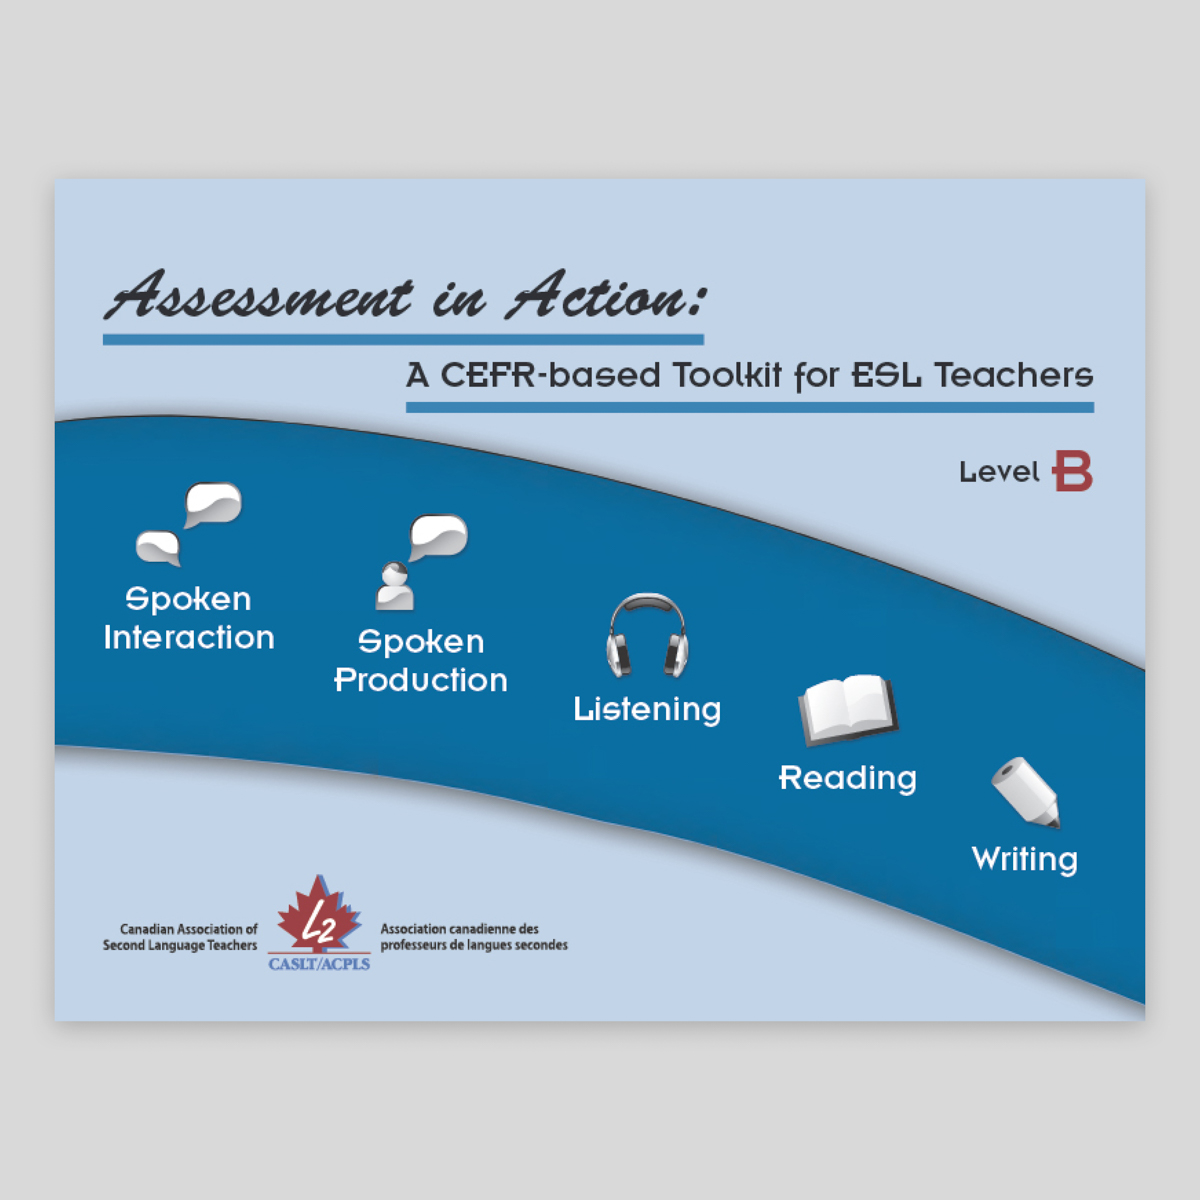 Association　Assessment　Toolkit　Teachers　Teachers　Canadian　in　for　CEFR-Based　Second　Action:　A　Language　ESL　of　(CASLT)